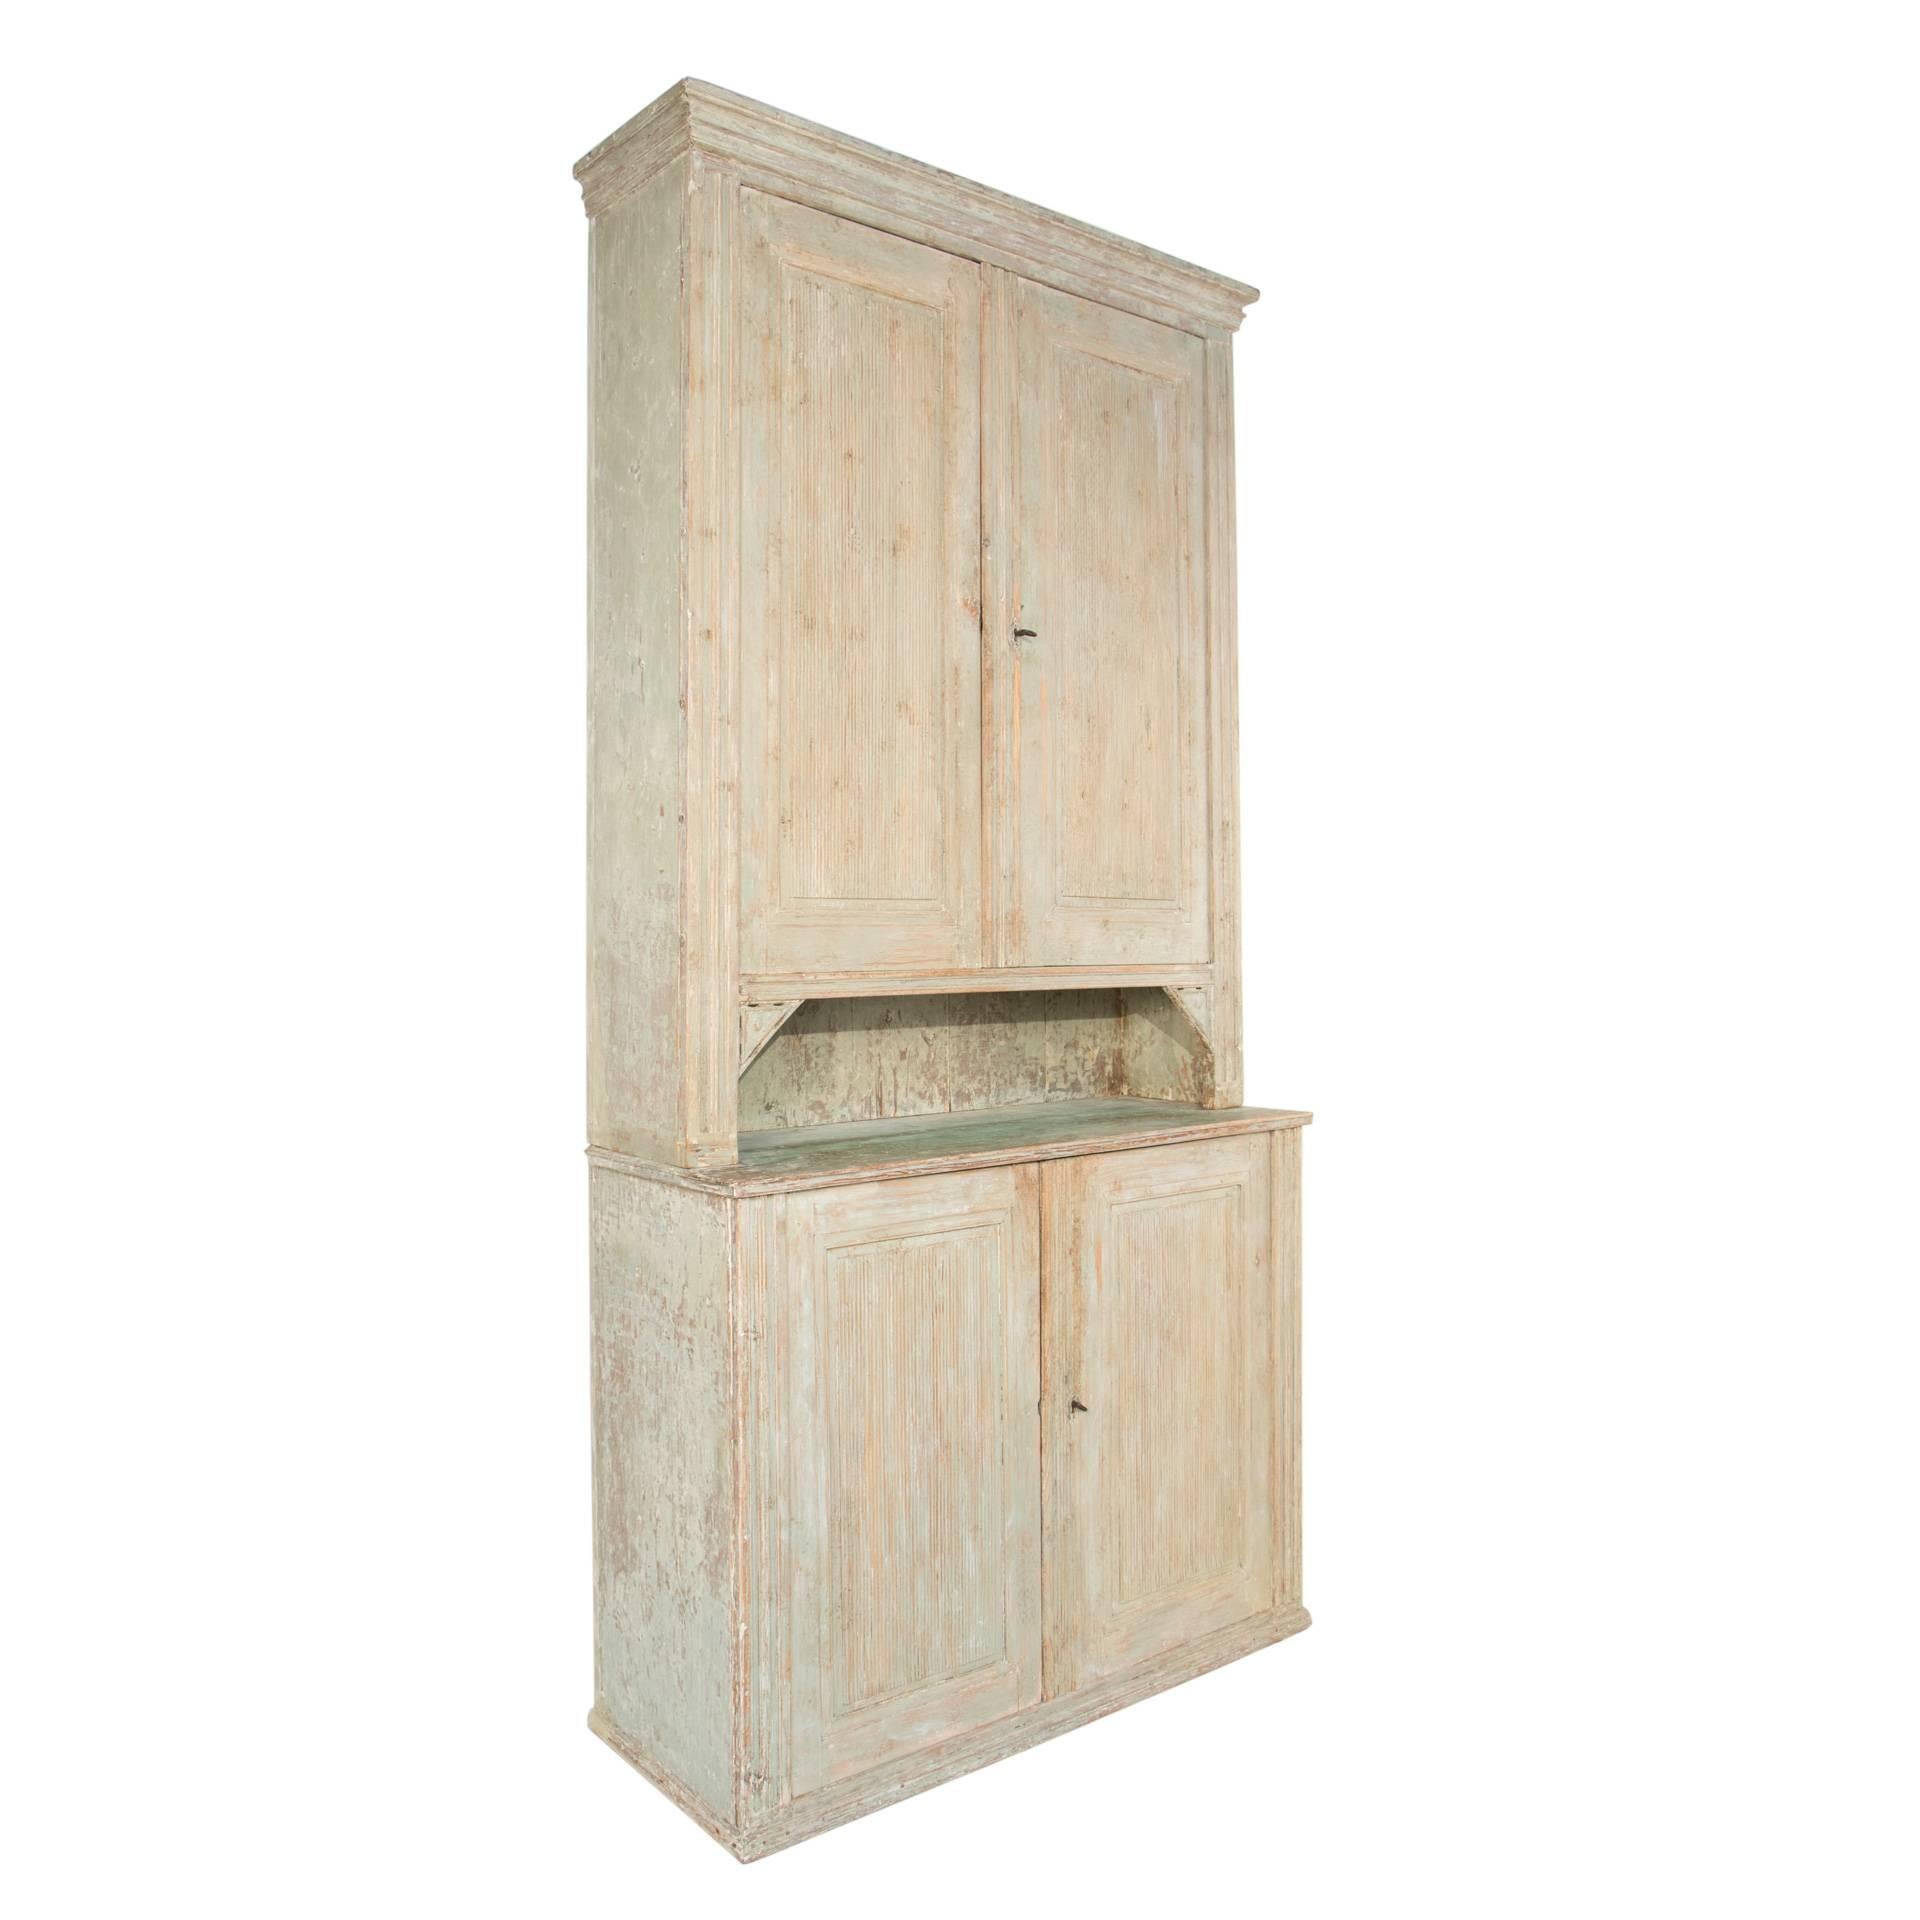 Gustavian cabinet with four doors in a worn pale green patina.